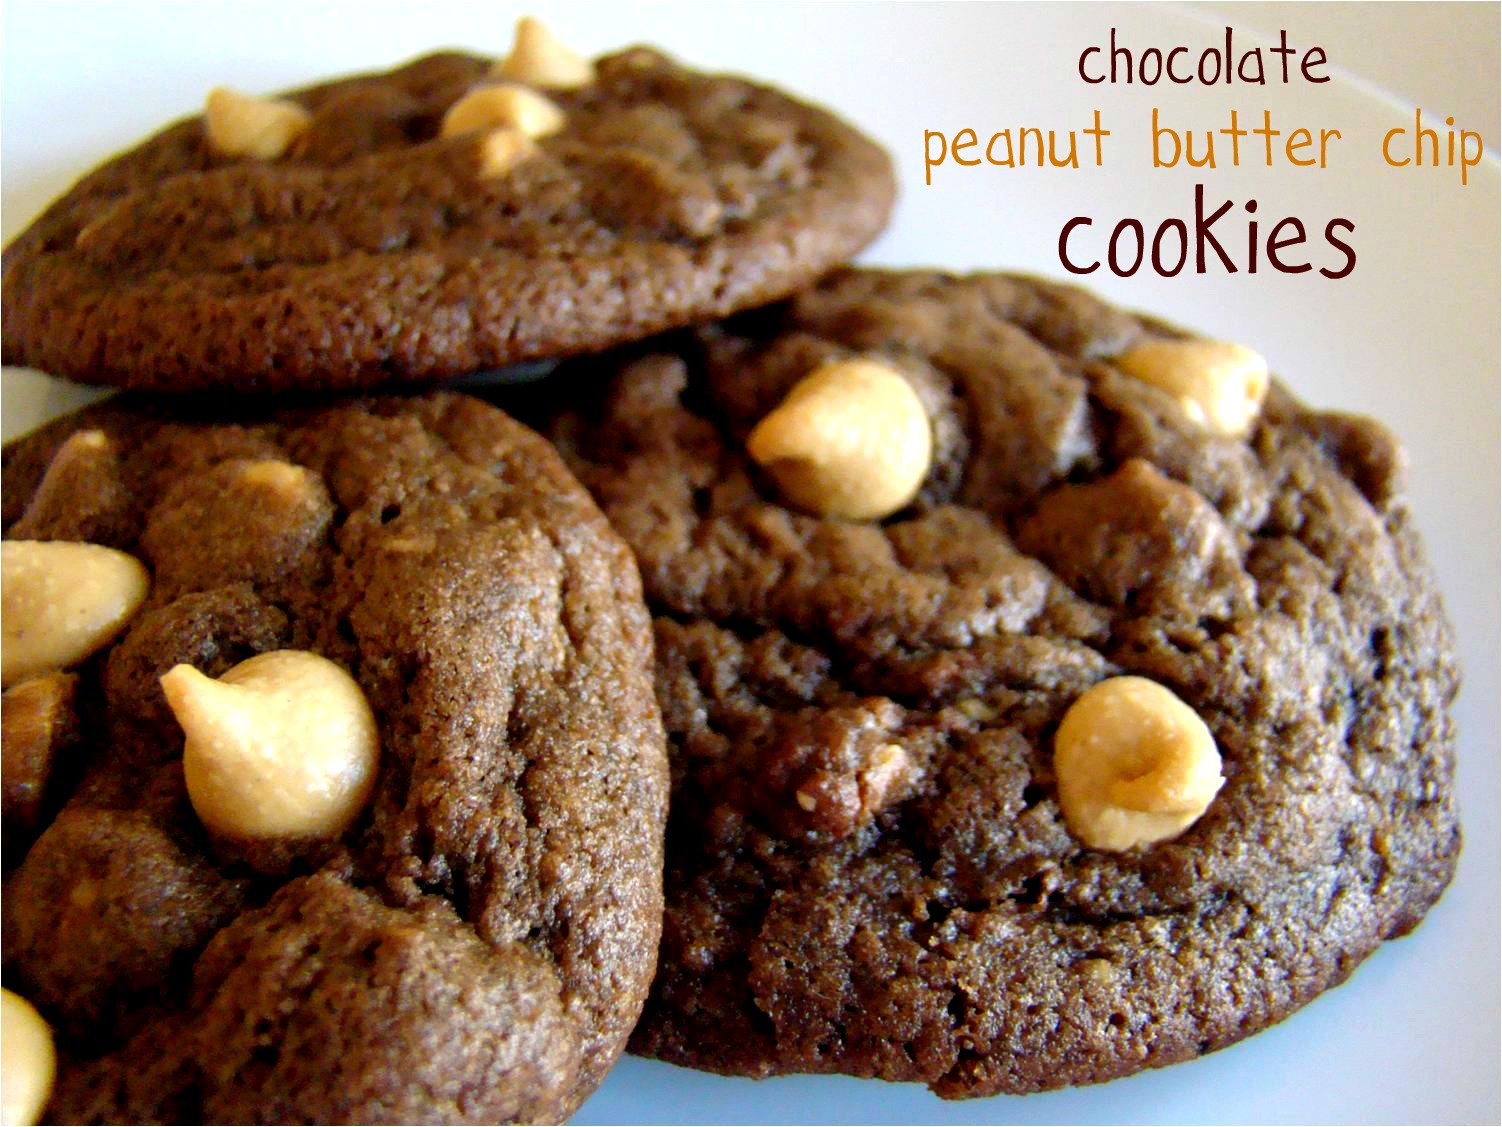 Chocolate Peanut Butter Chip Cookies
 Family Feedbag Chocolate peanut butter chip cookies